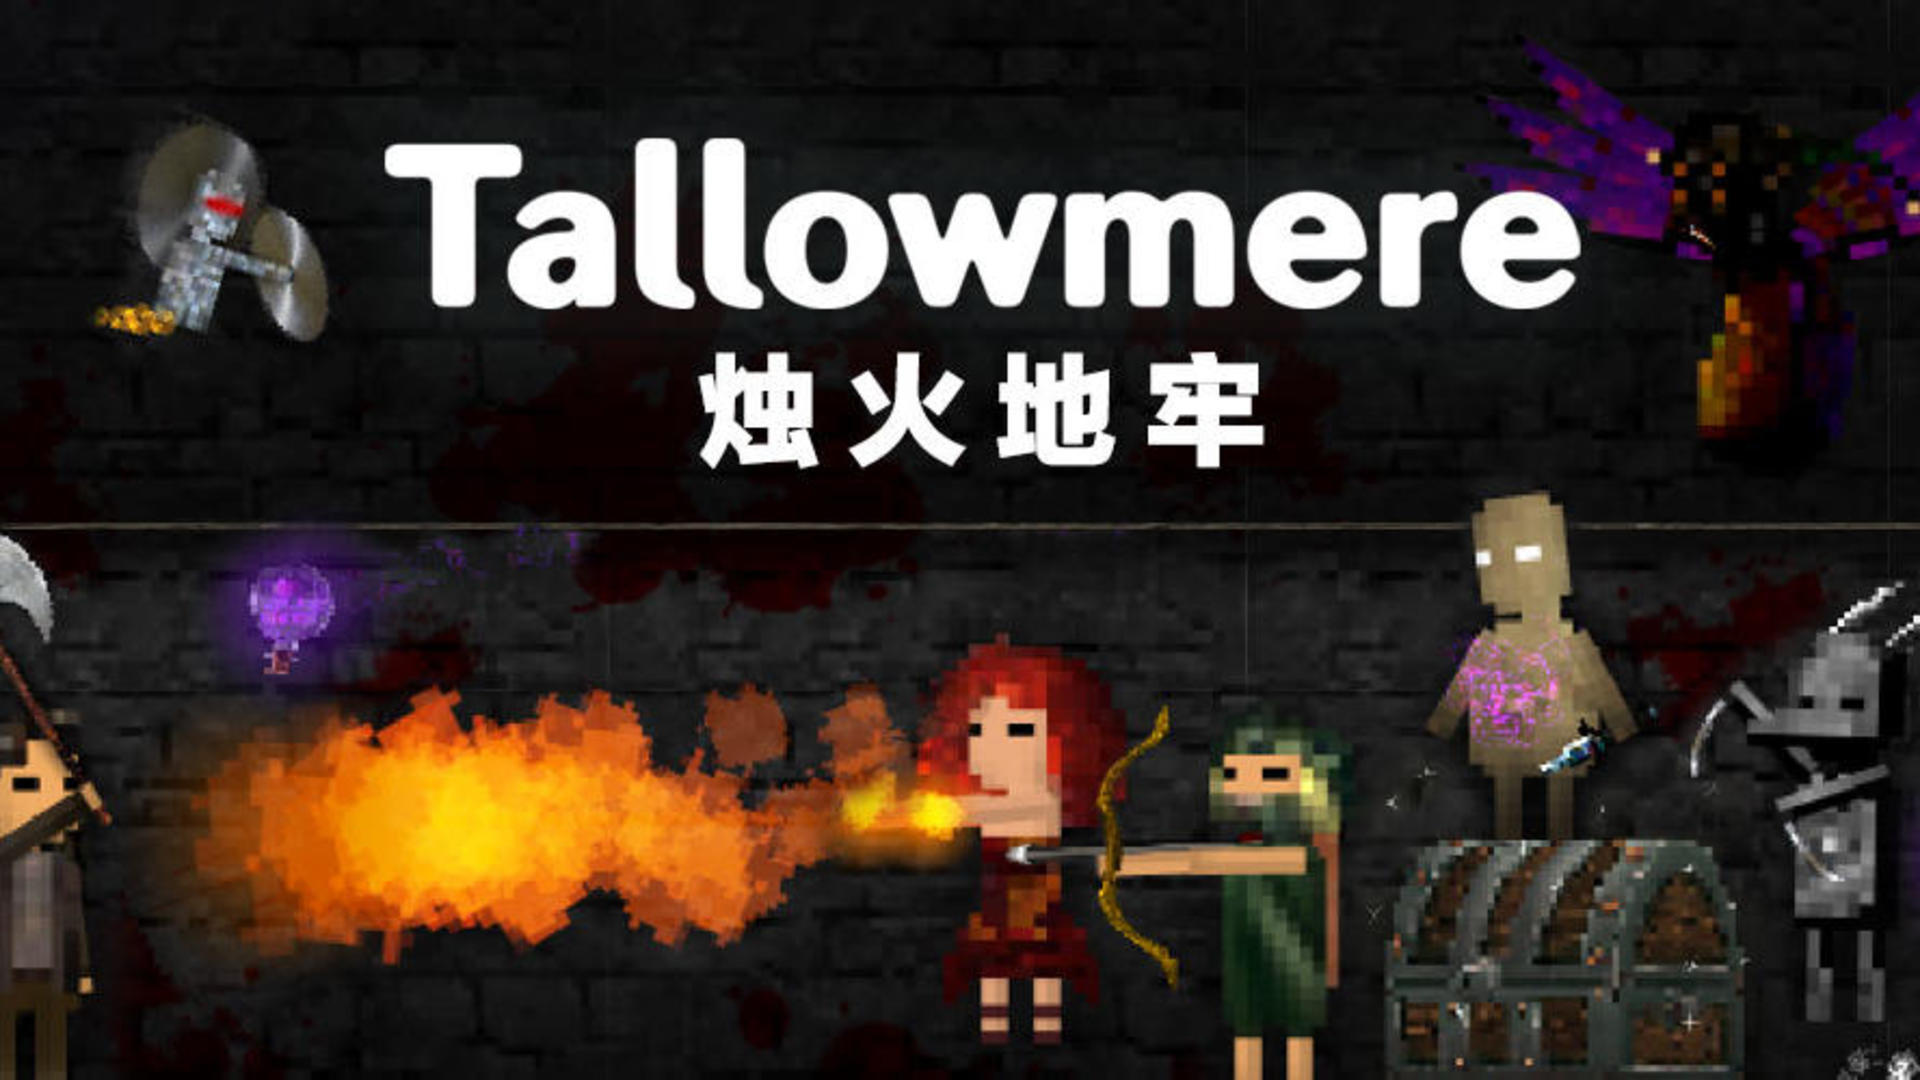 Tallowmere Android system requirement: OpenGL ES 3.0